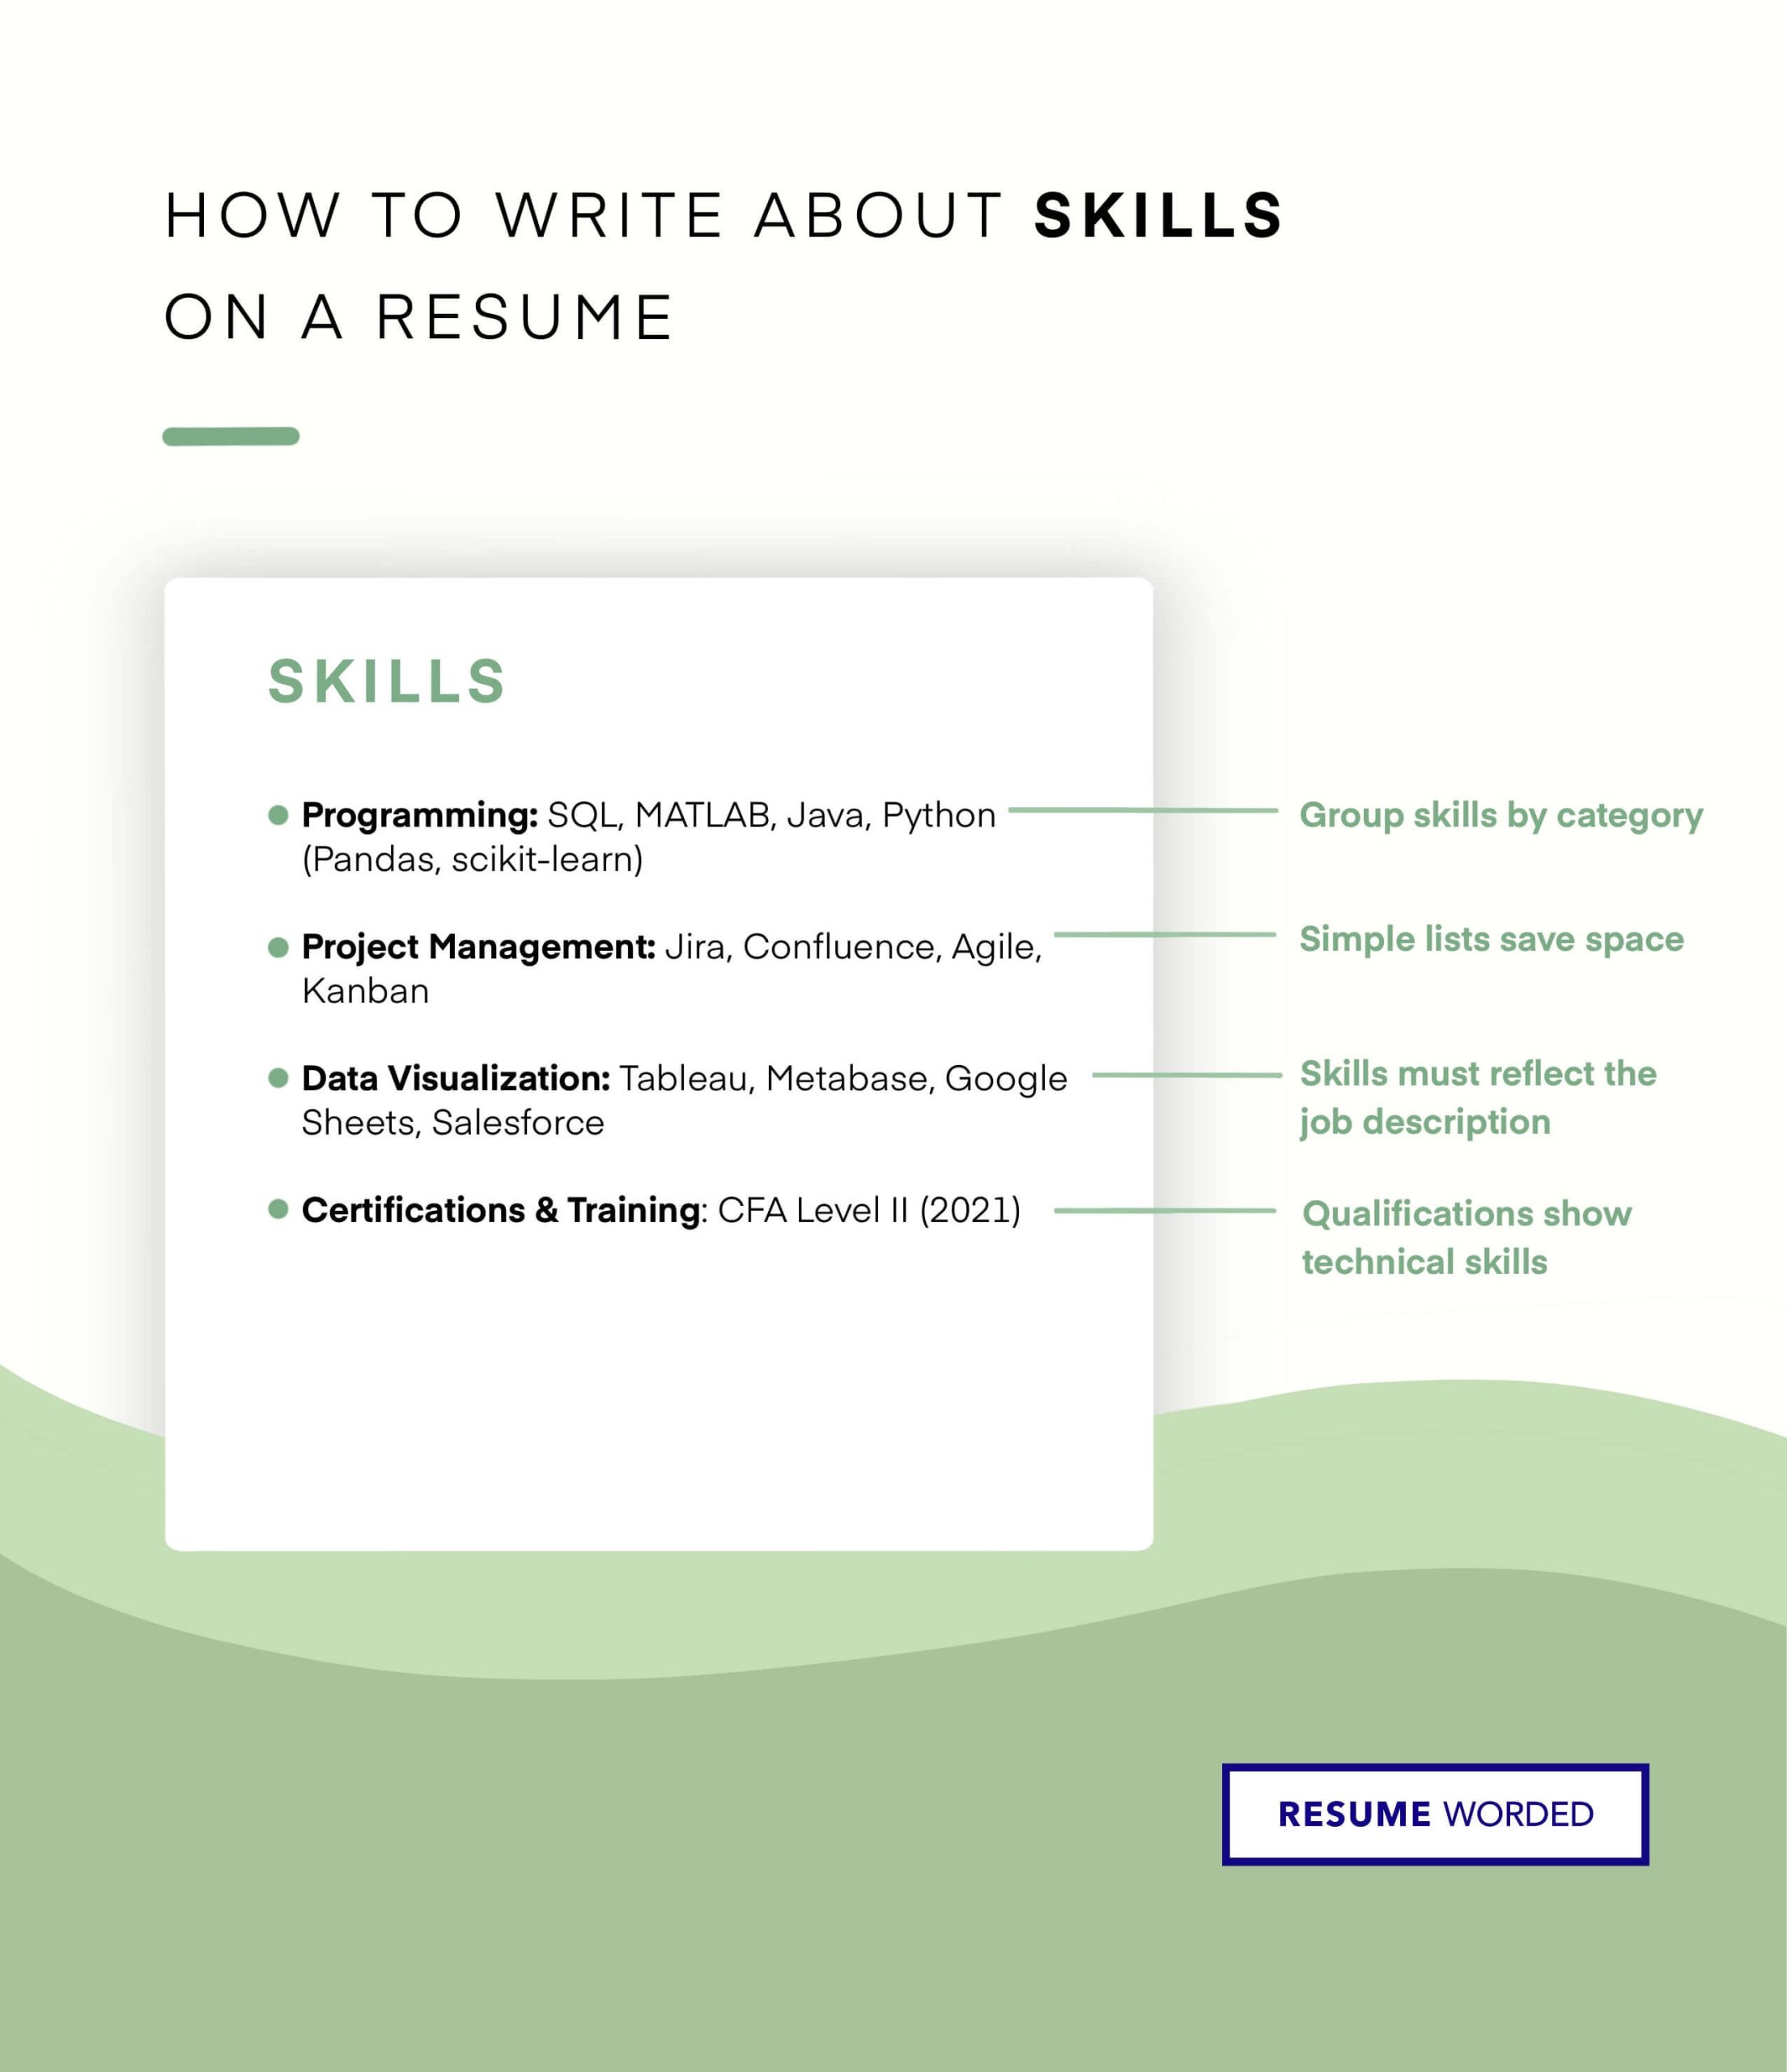 Learning Specialist Job Description Great Sample Resume Resume Skills and Keywords for Learning Specialist (updated for 2022)